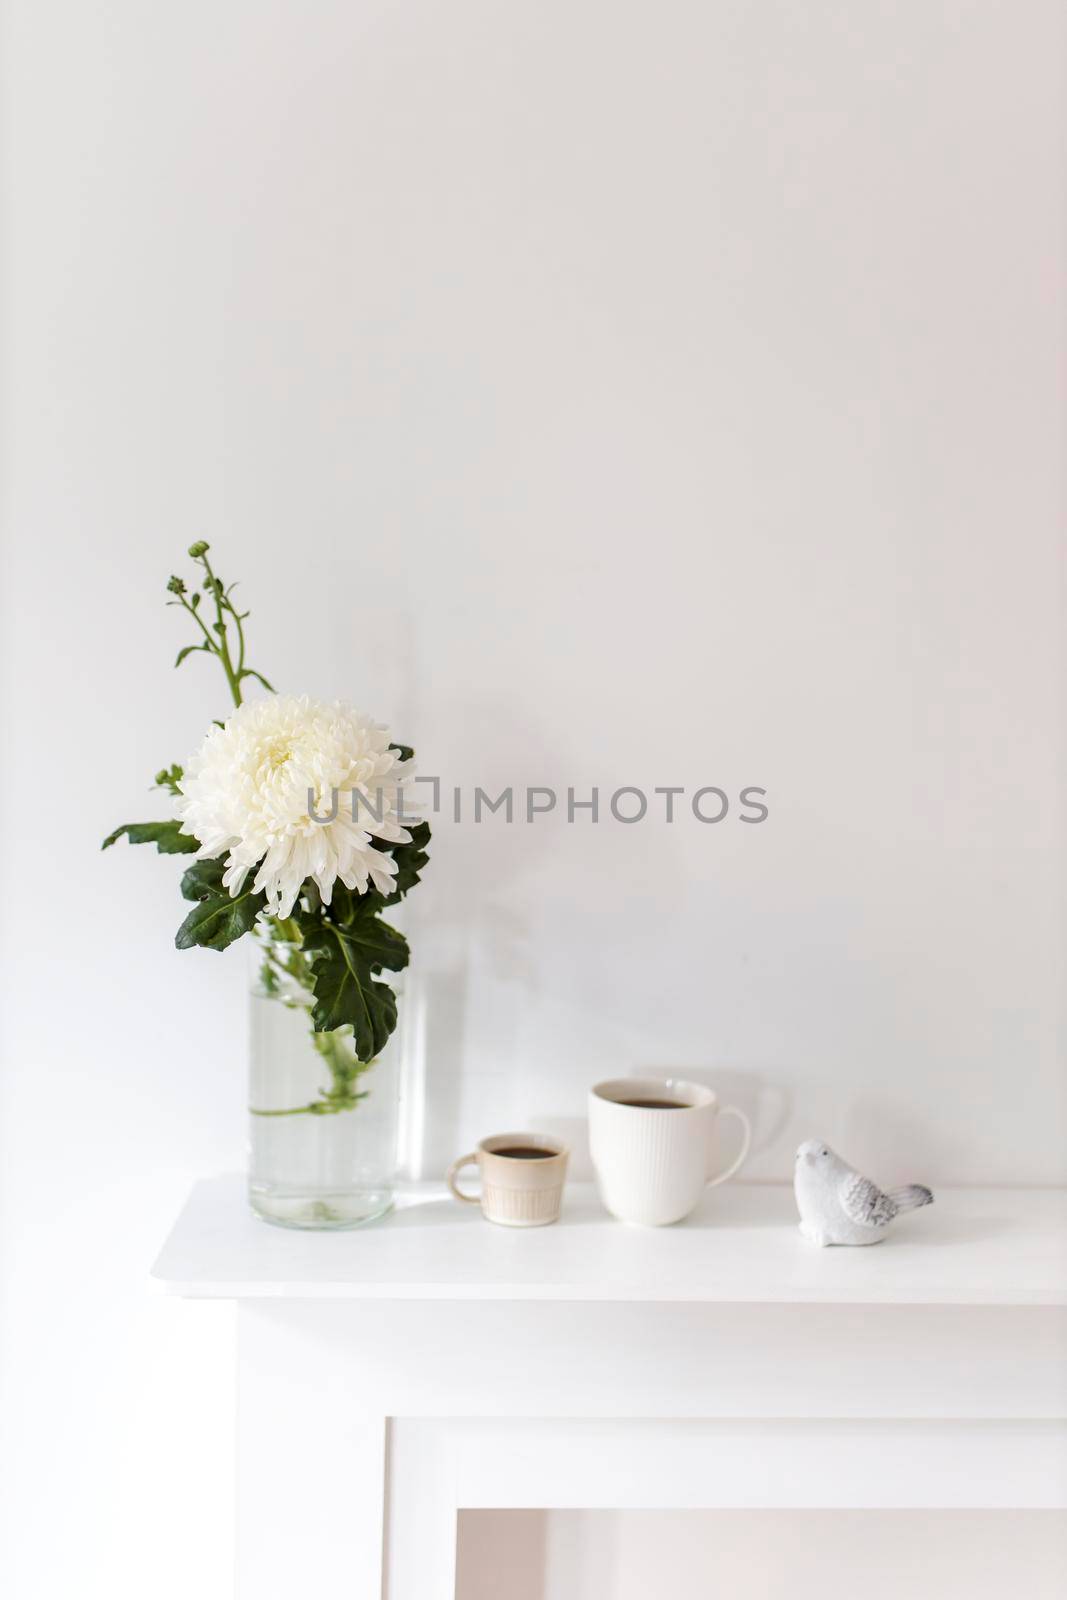 A large chrysanthemum in a glass vase, two fluted cups of coffee and ceramic bird figurines on the table. Office decoration. by elenarostunova